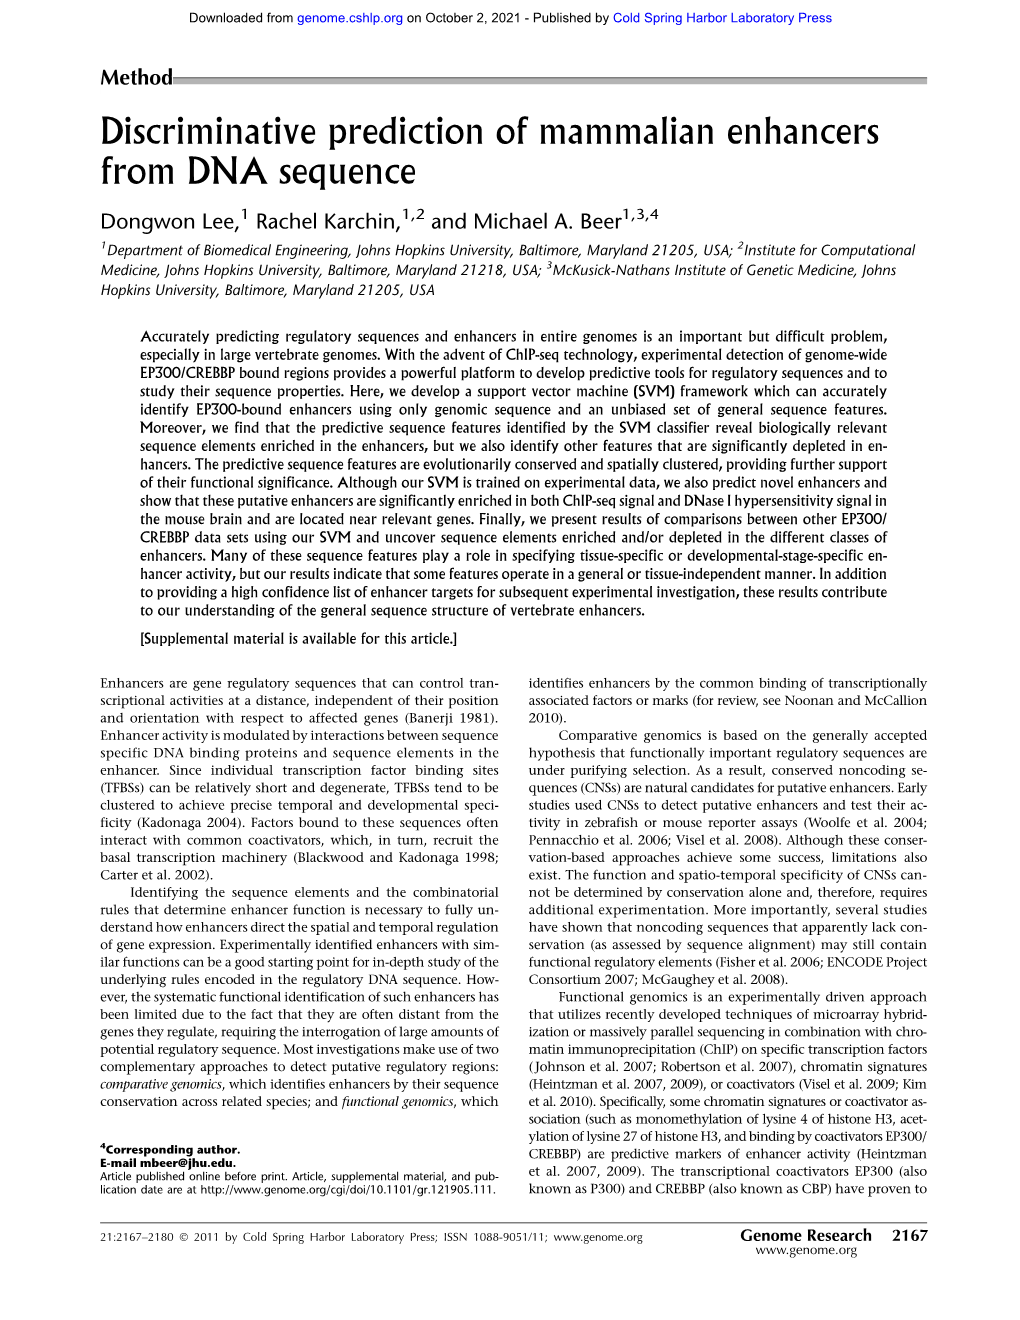 Discriminative Prediction of Mammalian Enhancers from DNA Sequence